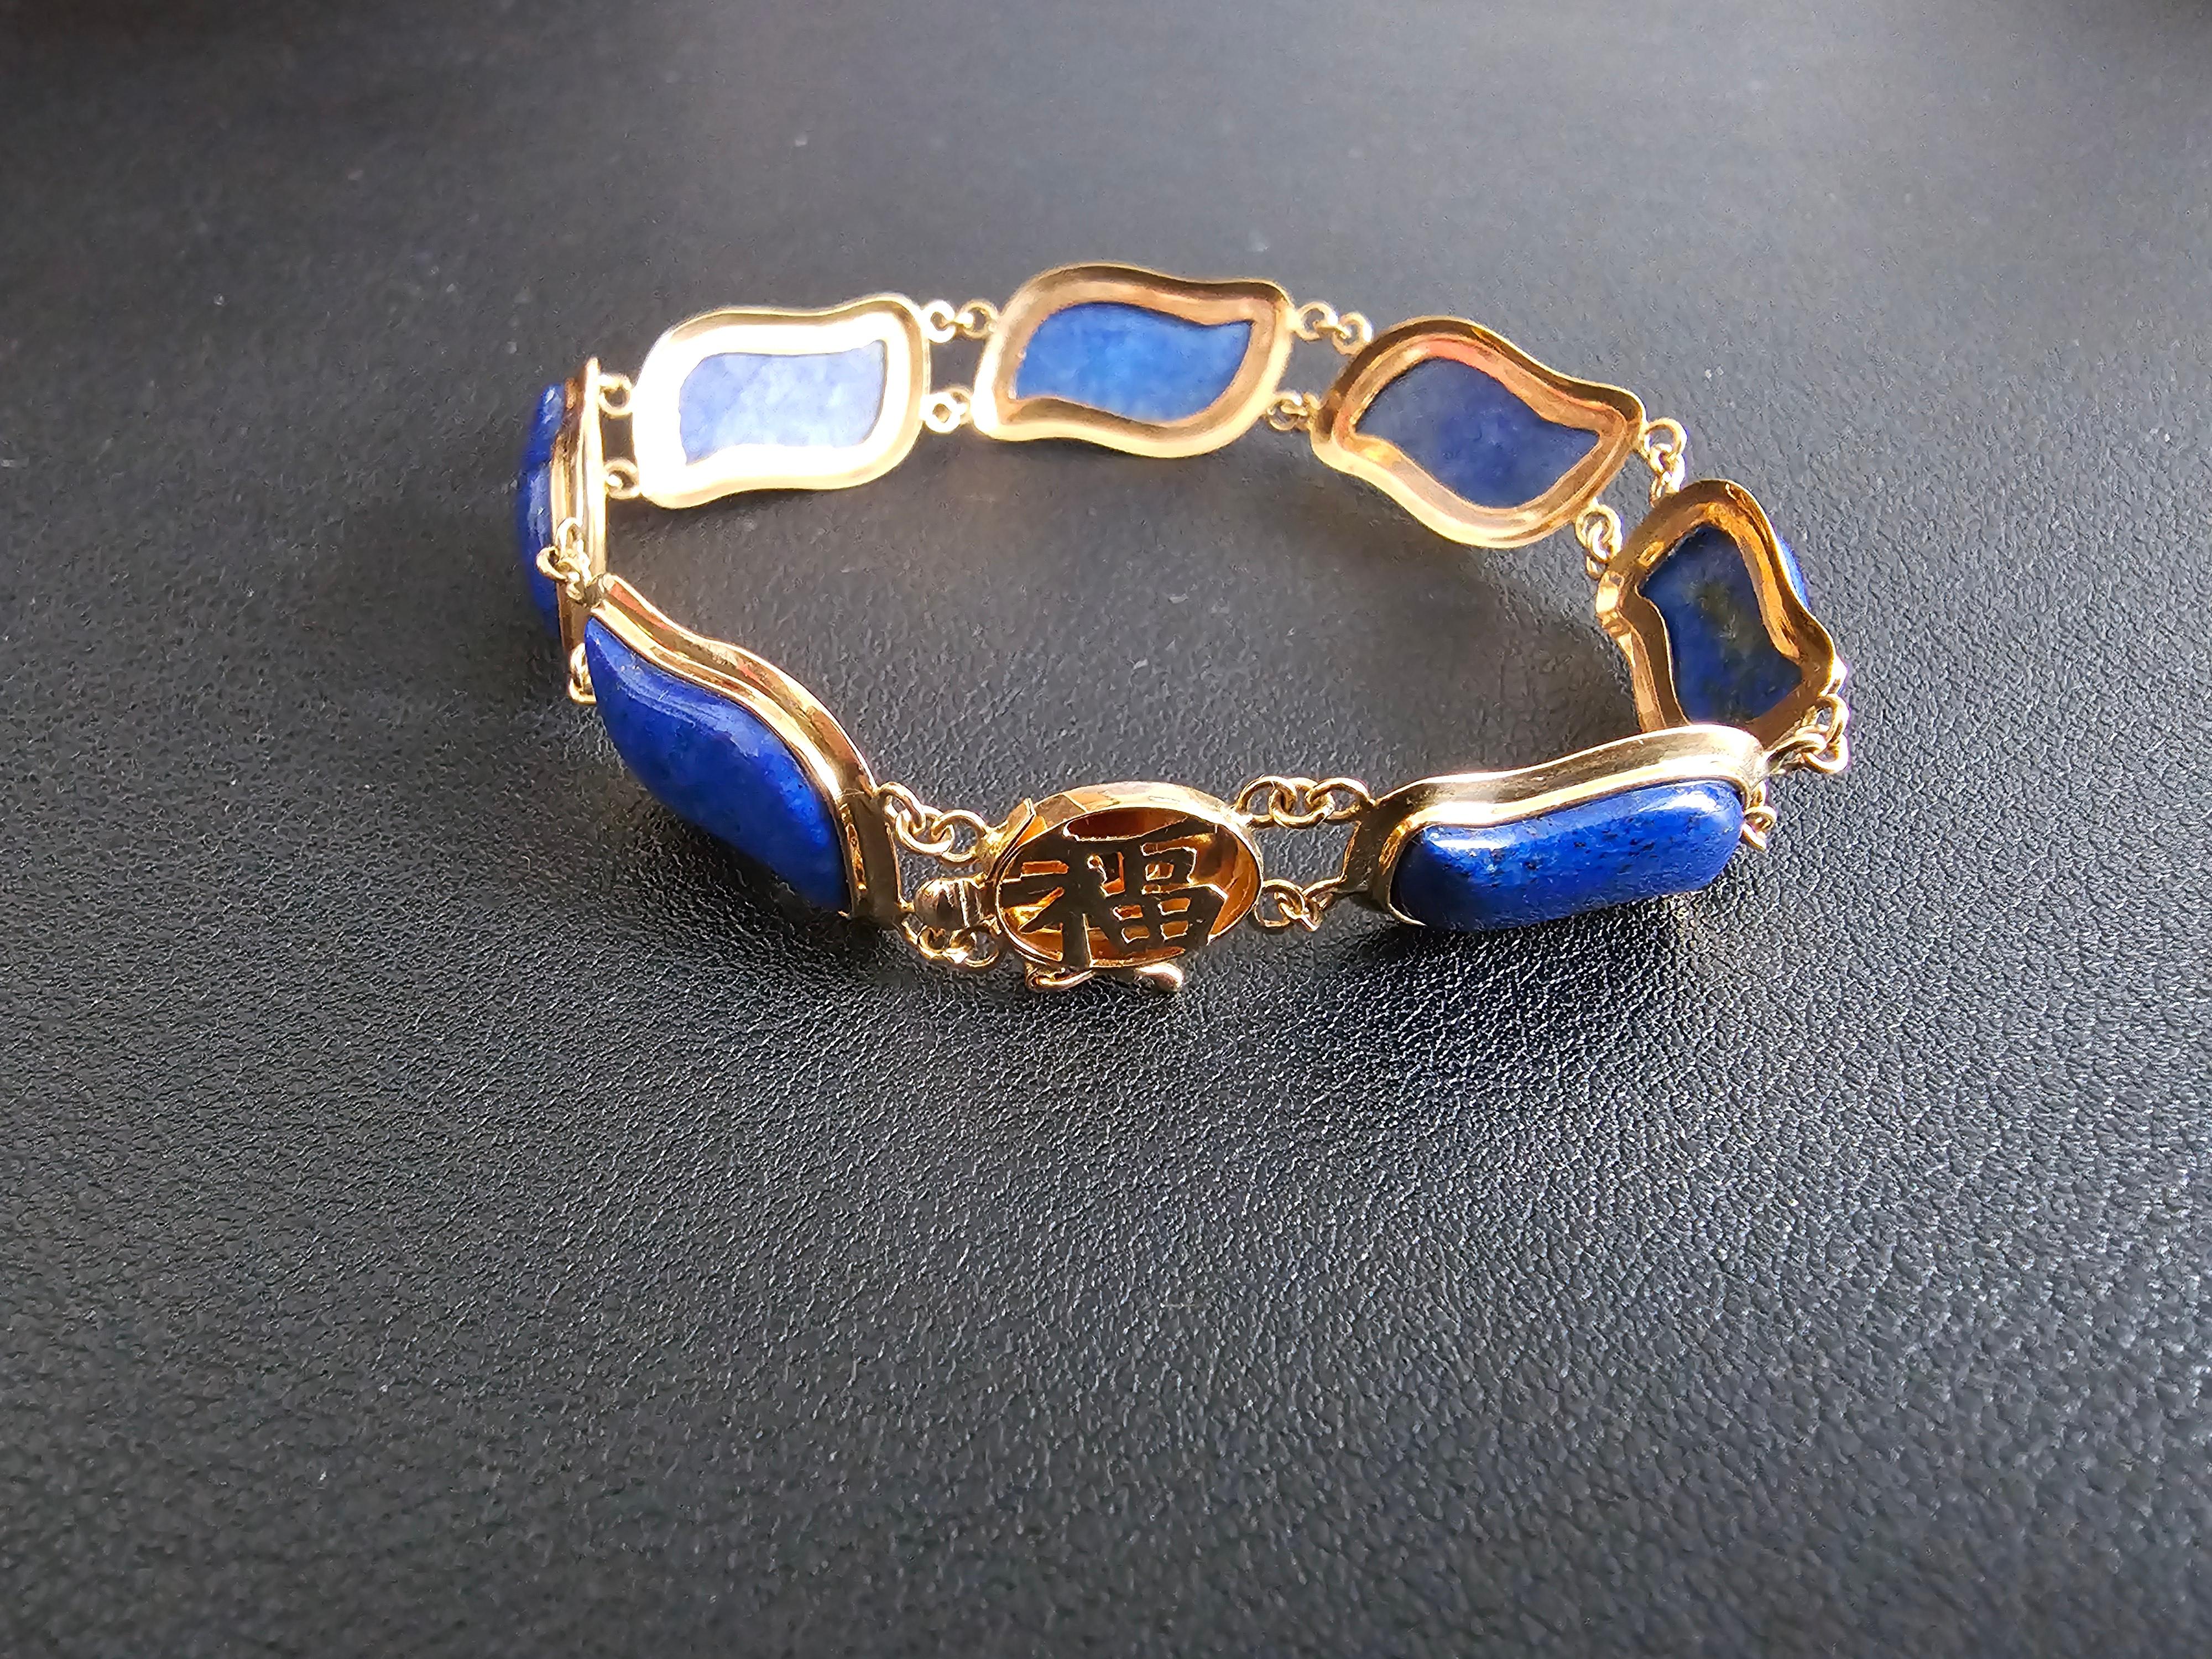 Blue Lapis Lazuli Bracelet Aurora Double Chained with 14K Solid Yellow Gold In New Condition For Sale In Kowloon, HK